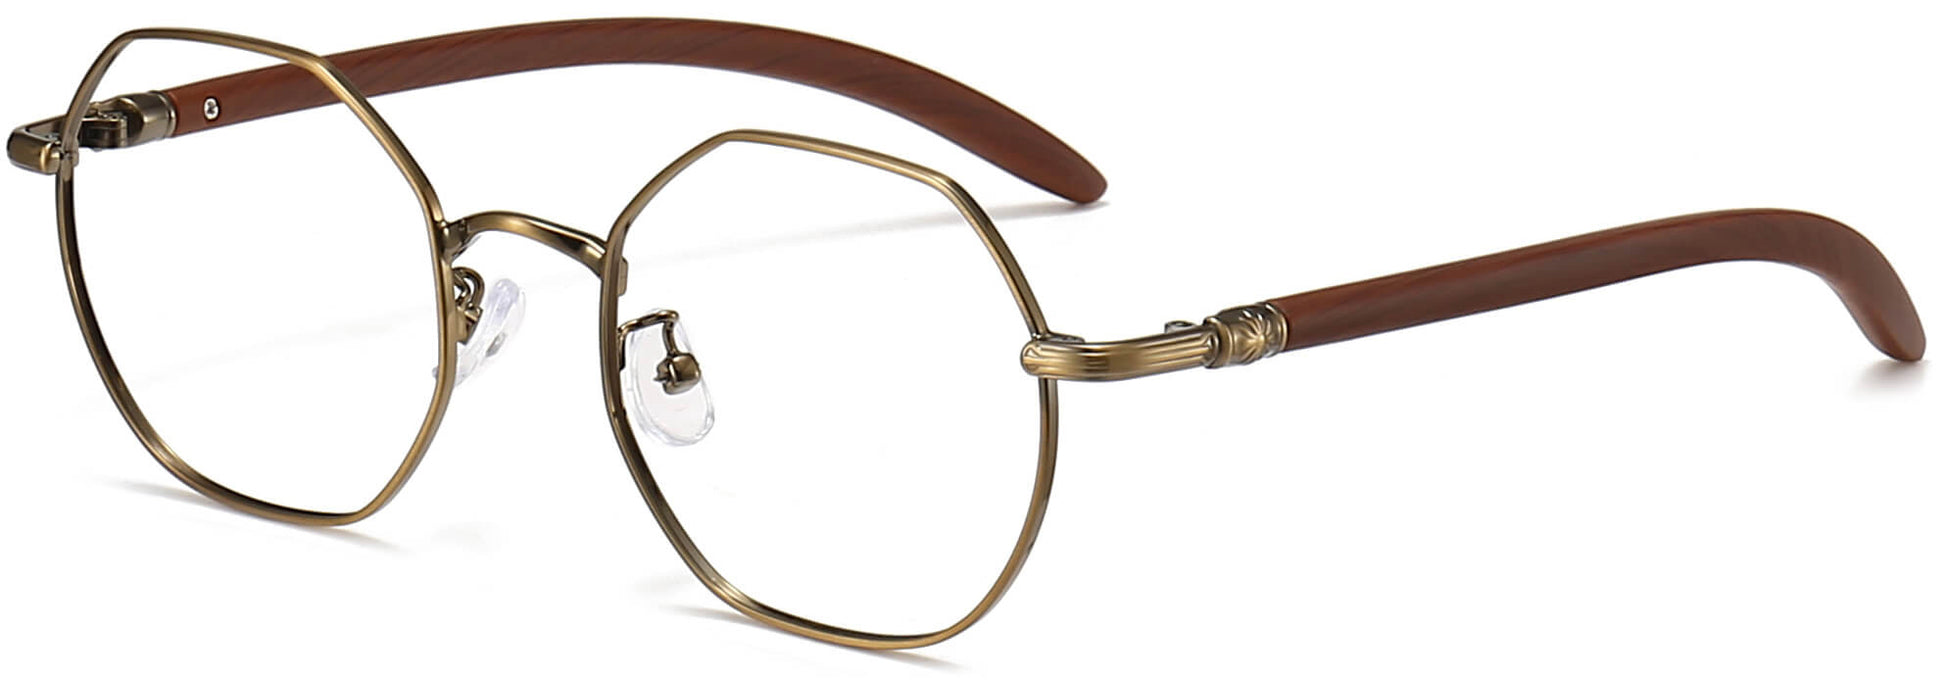 Alden Geometric Brown Eyeglasses from ANRRI, angle view